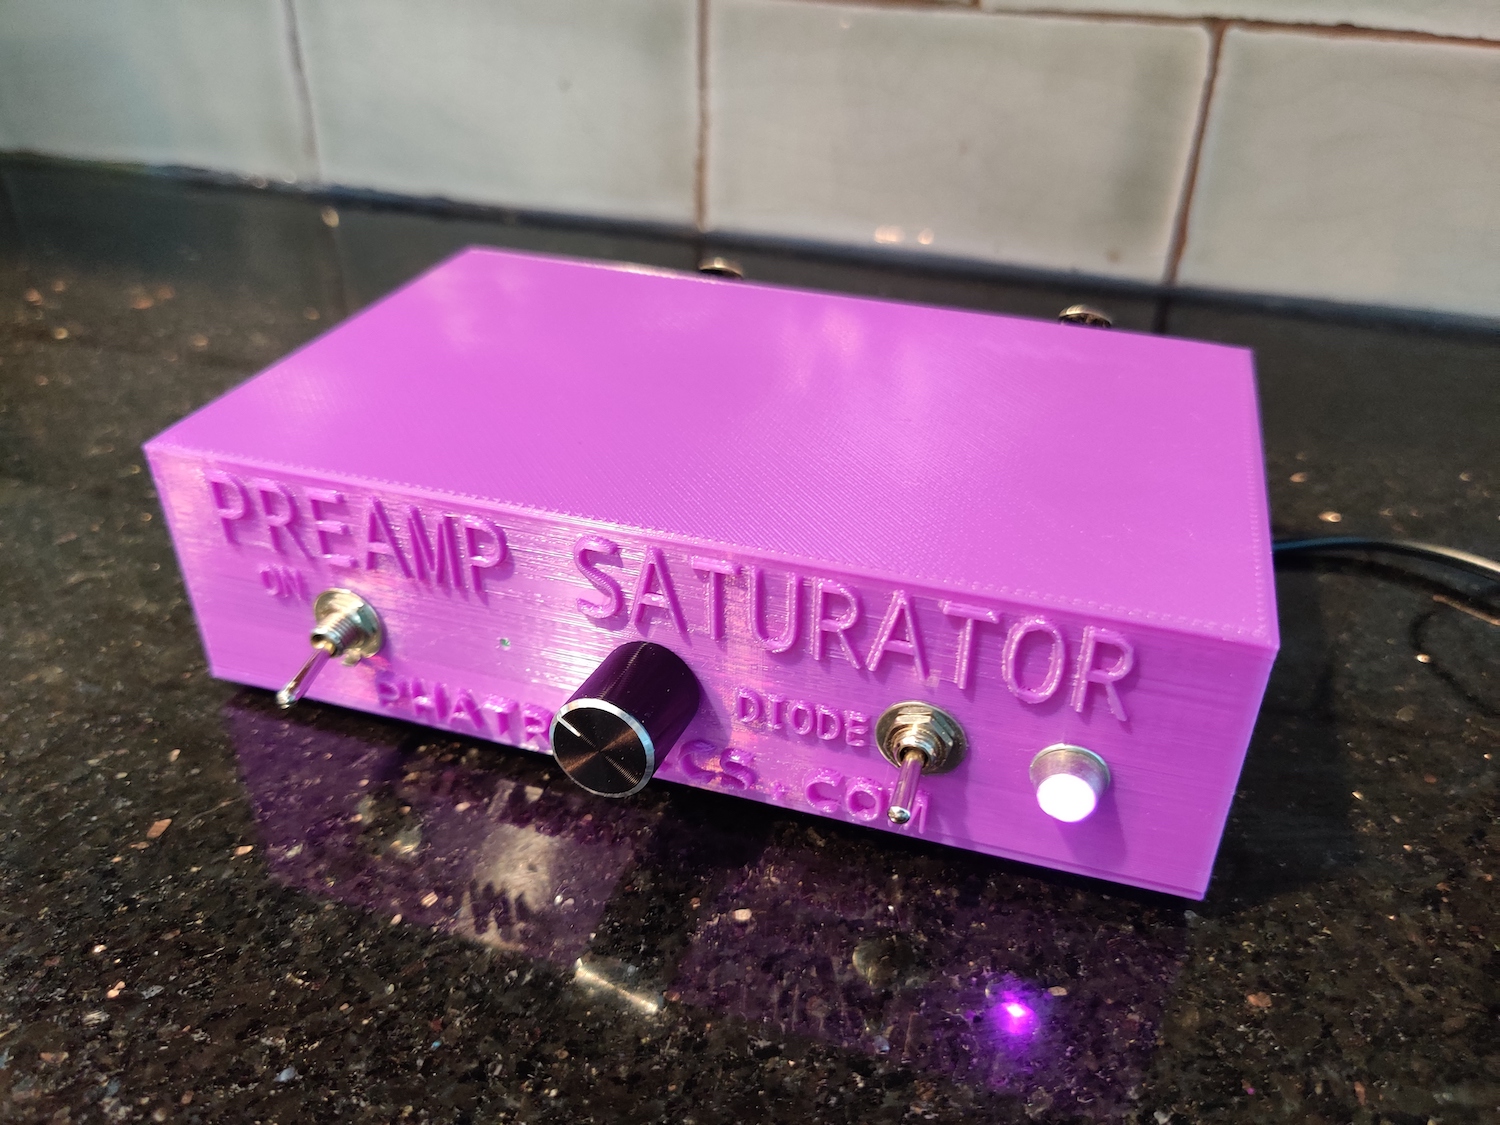 Preamp Saturator Analog Stereo Saturation